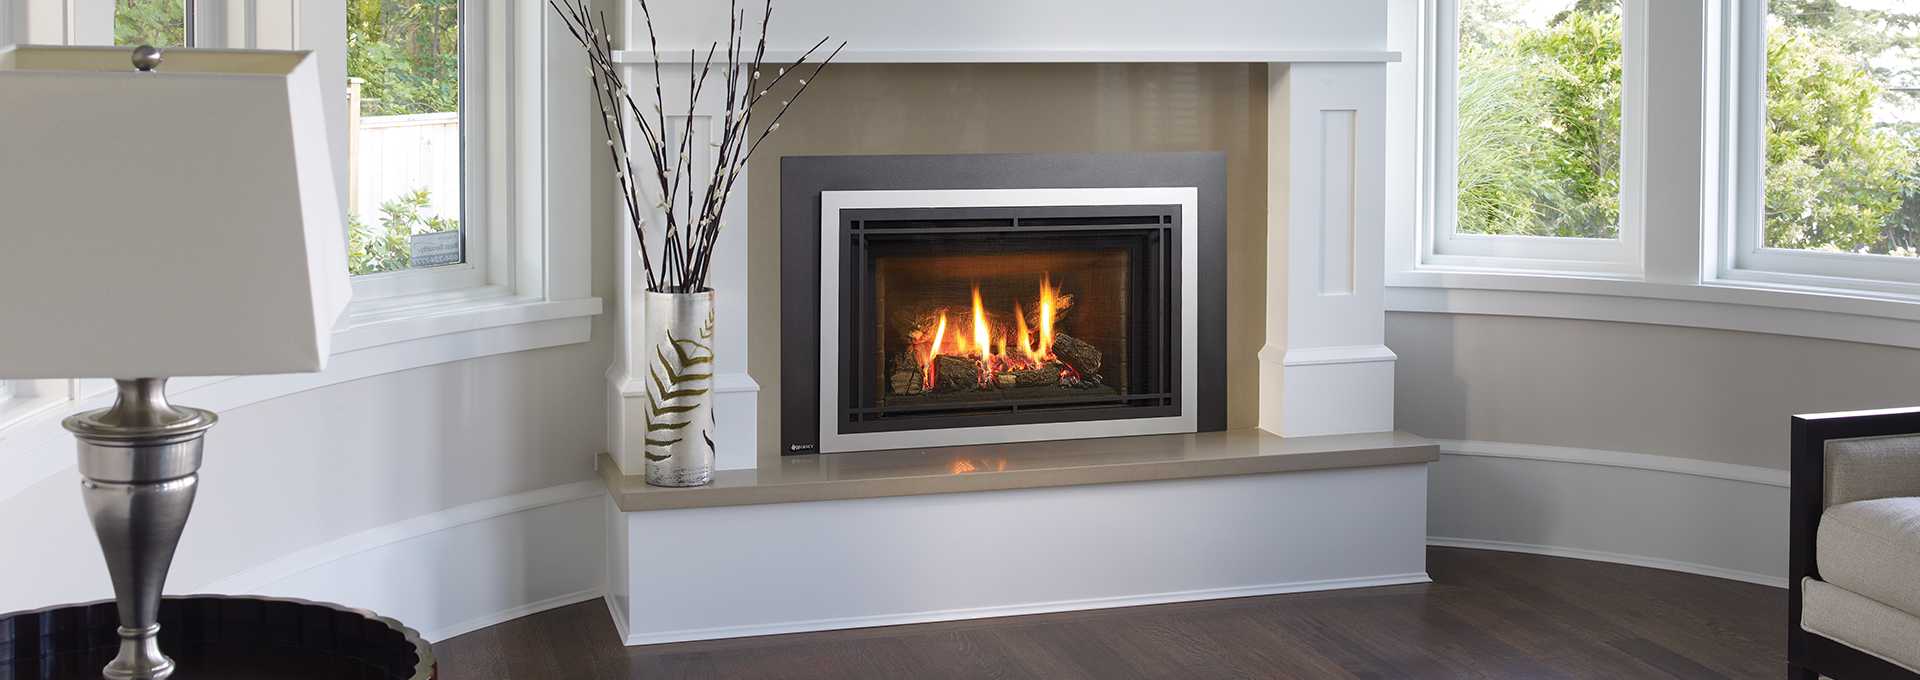 5 Gas Fireplace Maintenance Tips To Help You Save 